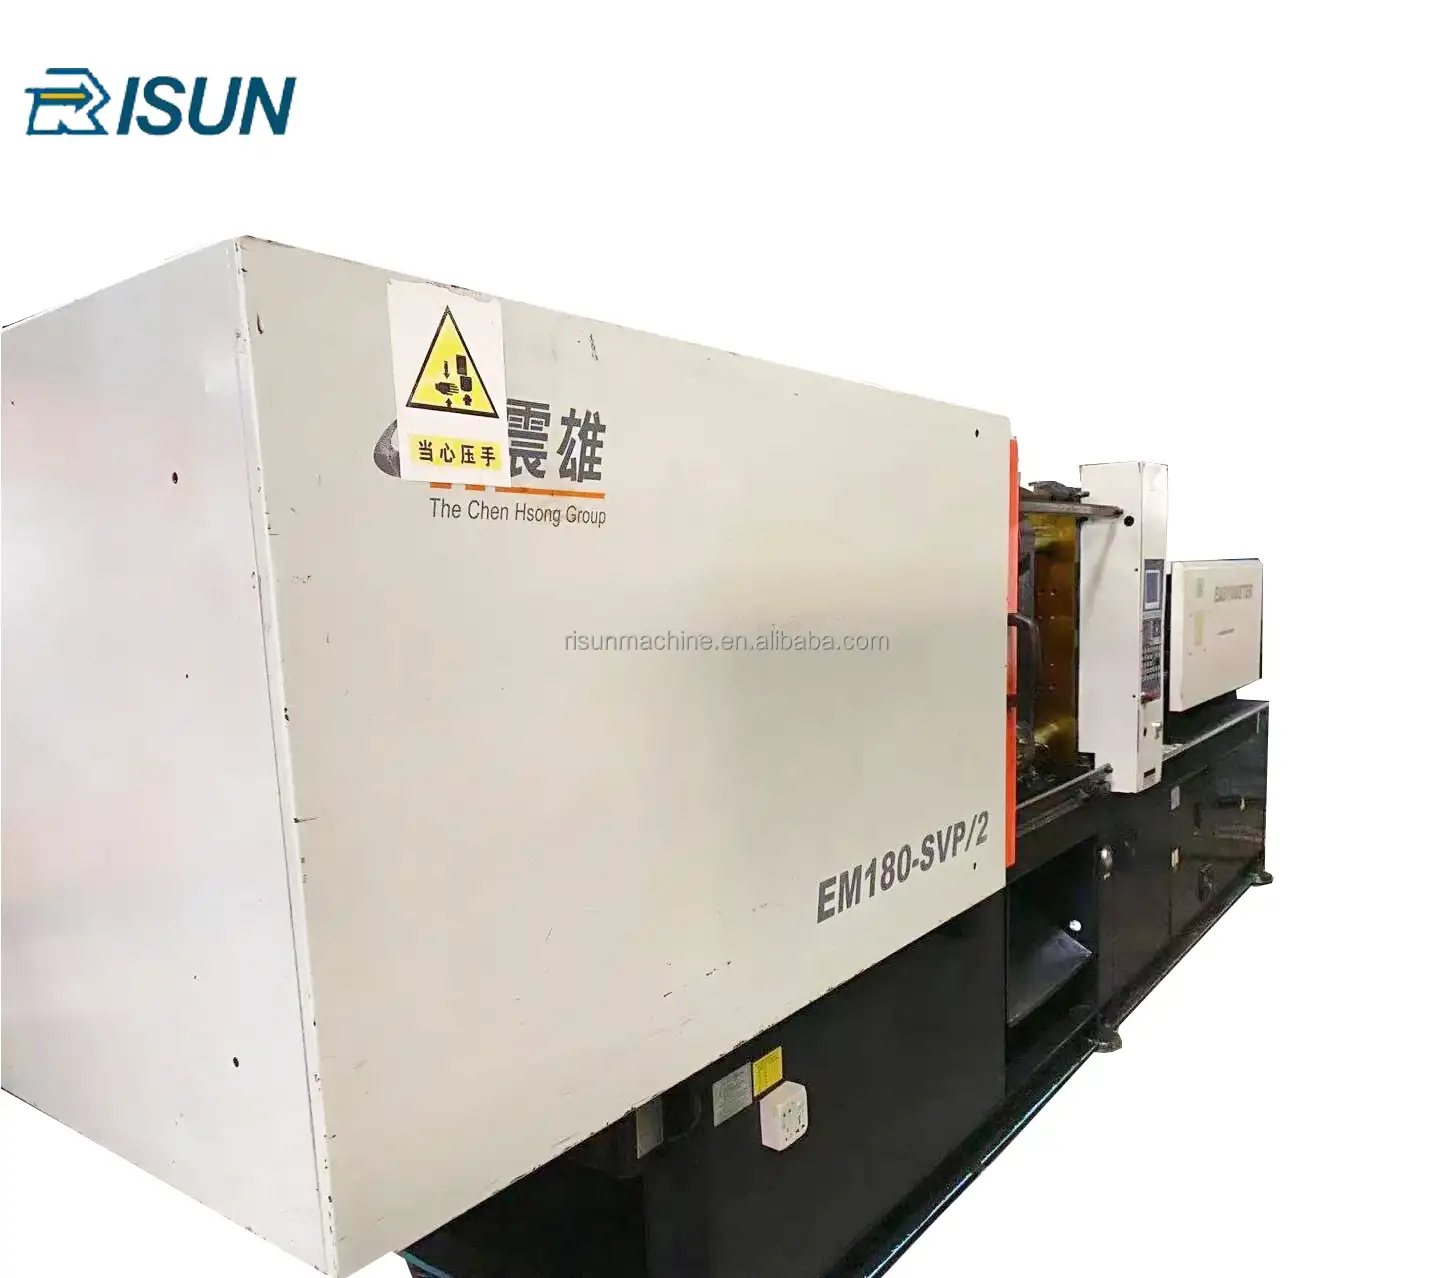 The Chen Hsong Group EM180-SVP/2 injection machines Used injection molding machine Injection machine